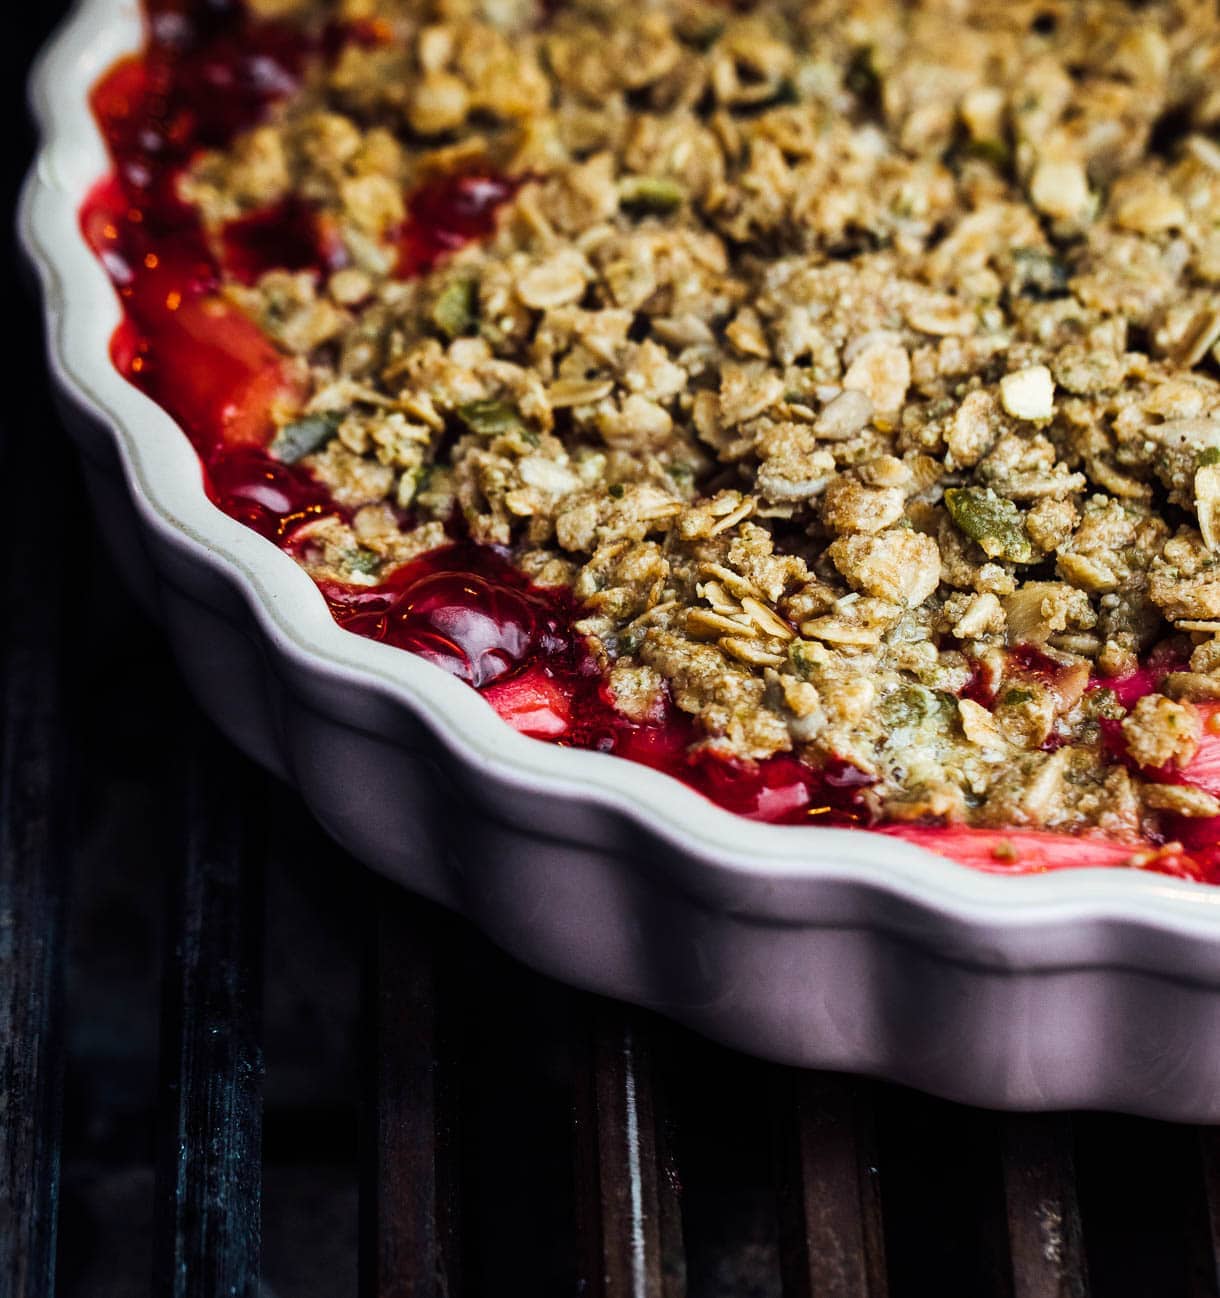 Best Gluten Free Rhubarb Crisp, With Oat And Seed Streusel